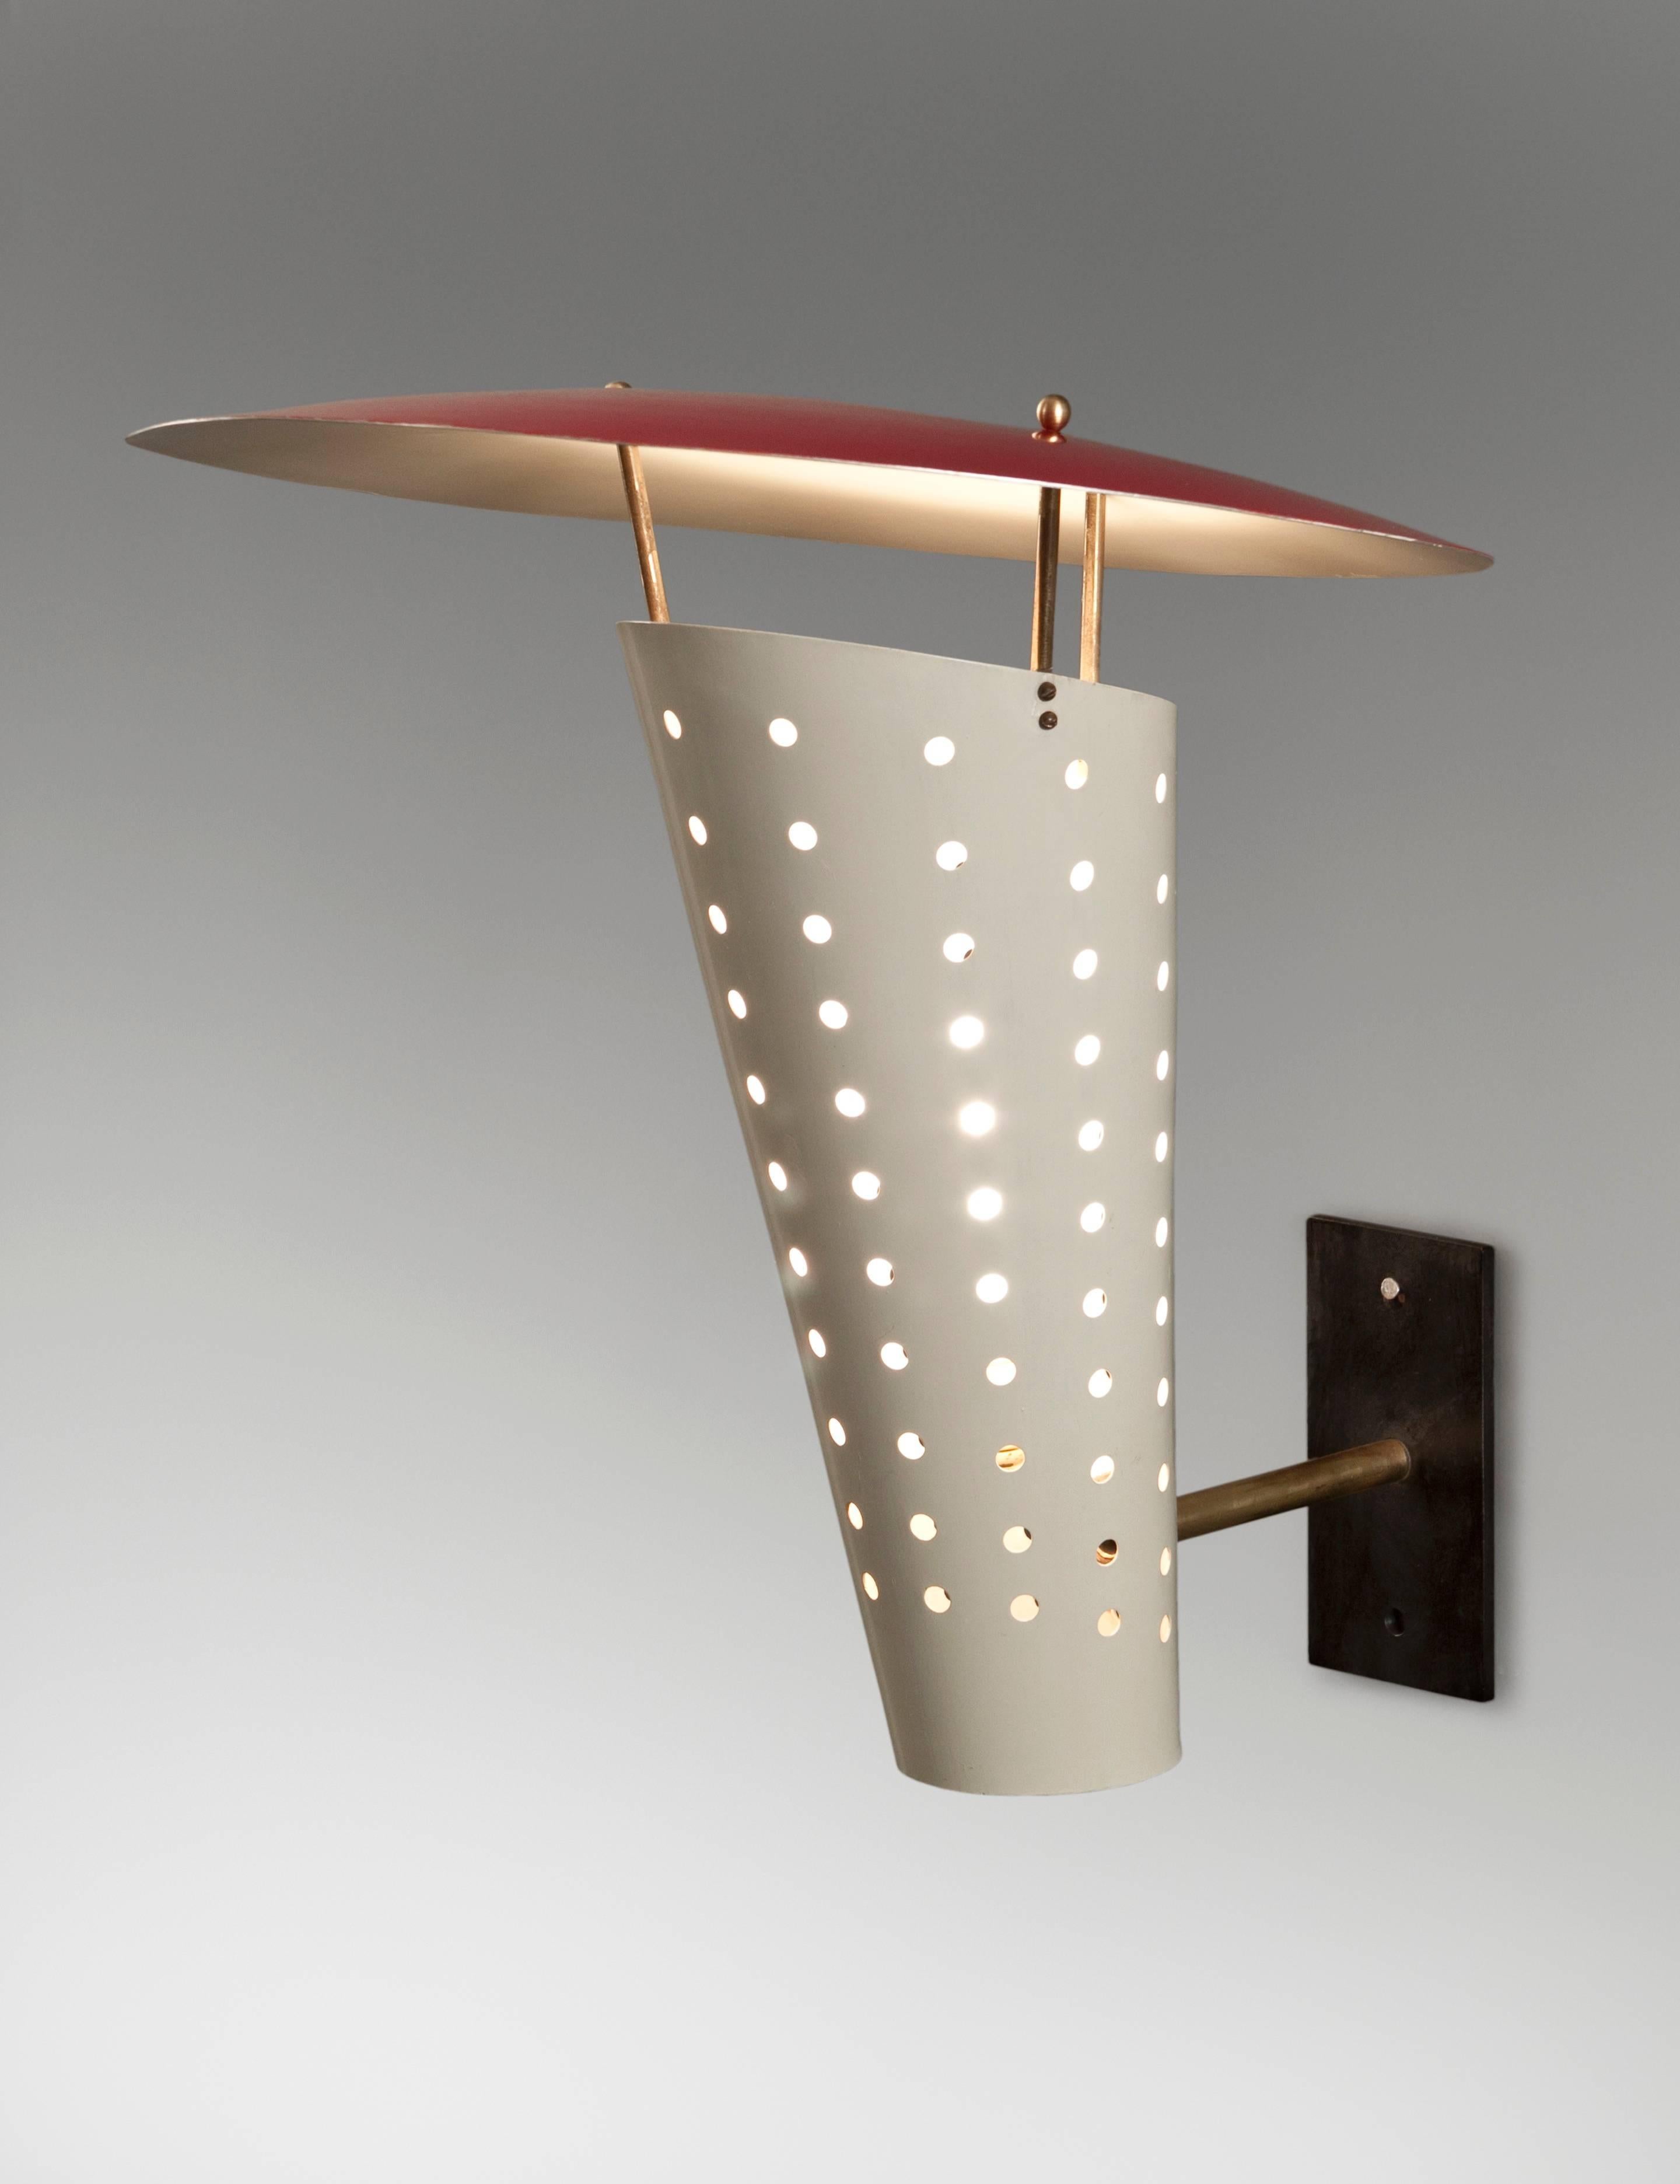 Large scale modernist sconces of a sophisticated yet deceptively simple design. The circular domed reflector raised on three uprights, above a perforated conical diffuser, supported by a rectangular backplate. Original paint in very good